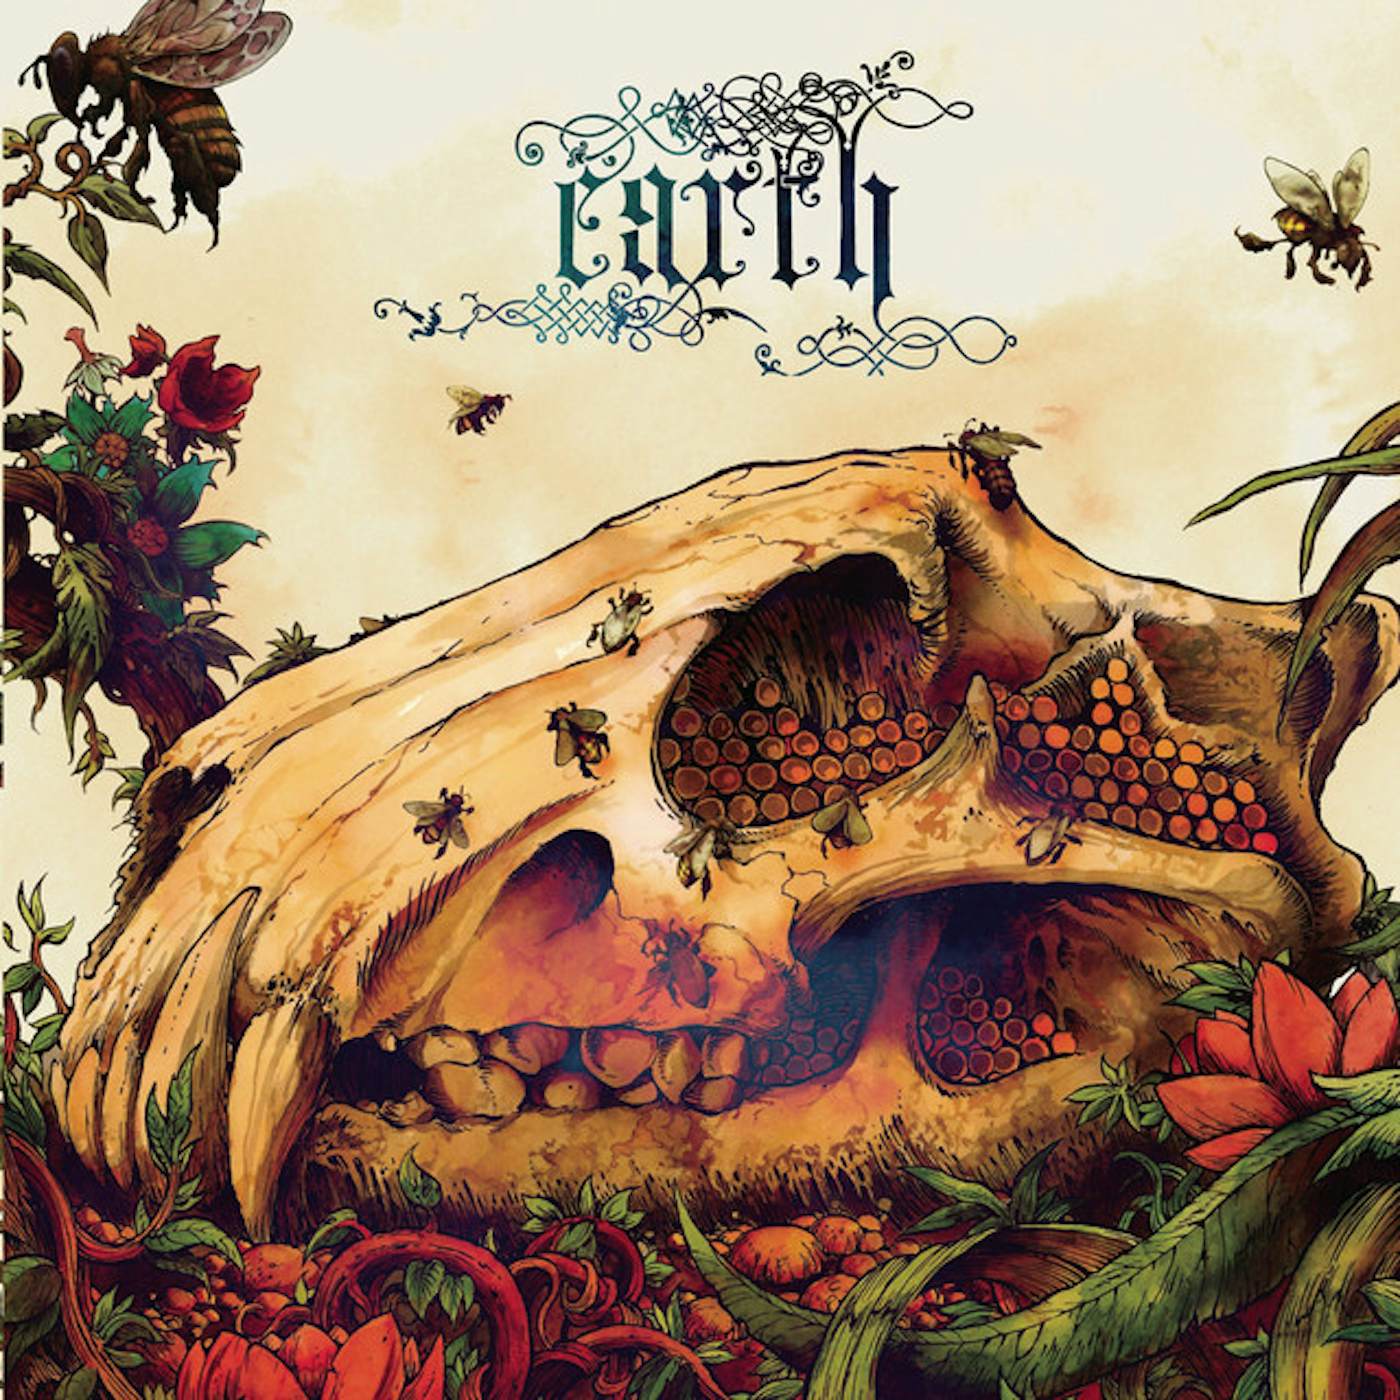 Earth BEES MADE HONEY IN THE LION'S SKULL Vinyl Record